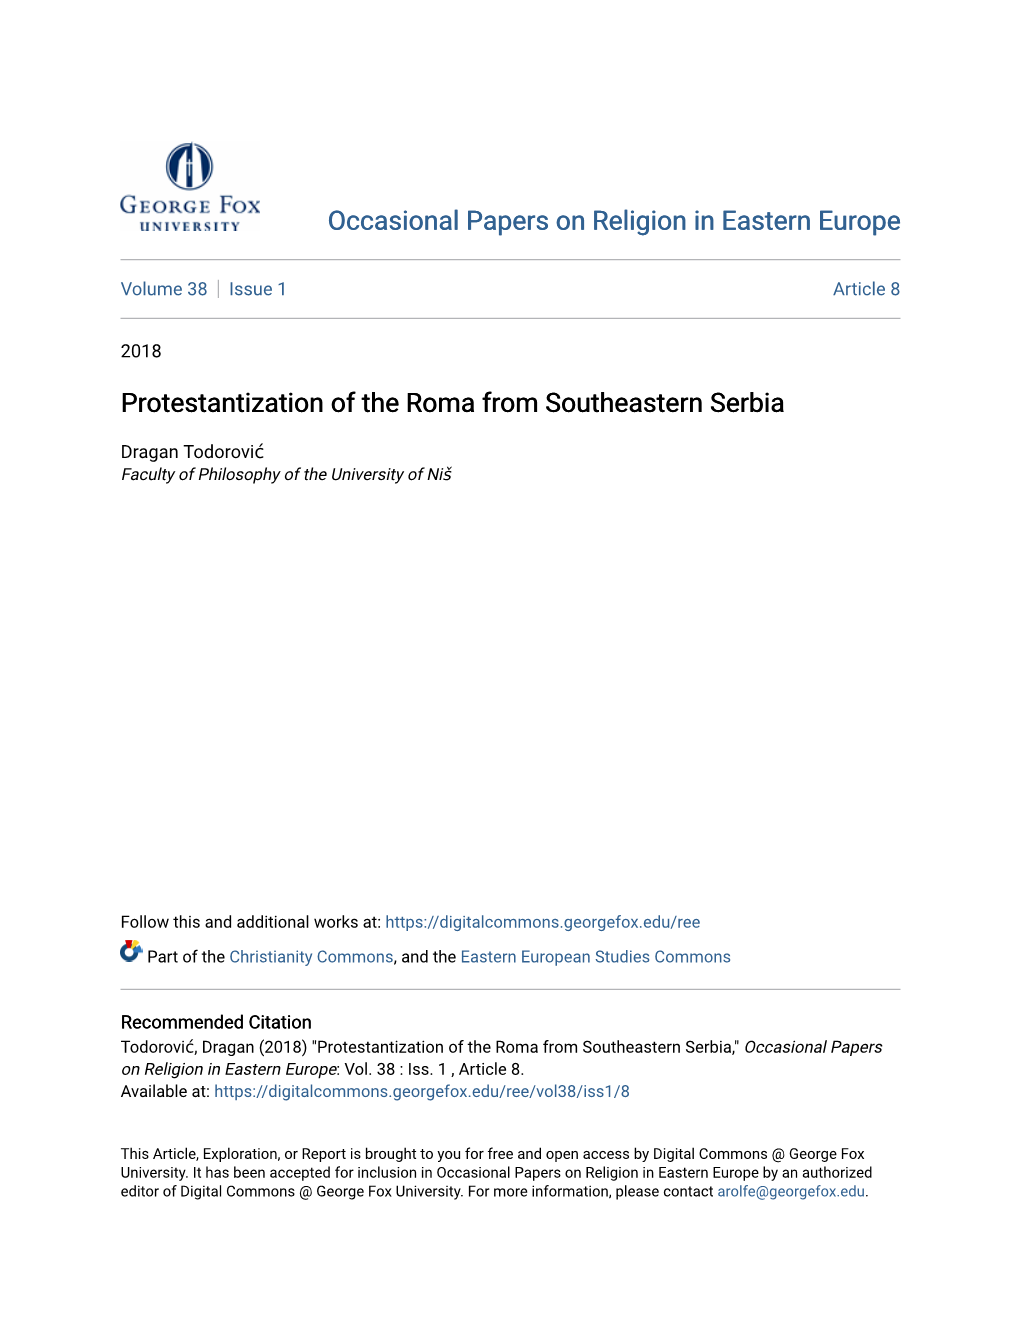 Protestantization of the Roma from Southeastern Serbia